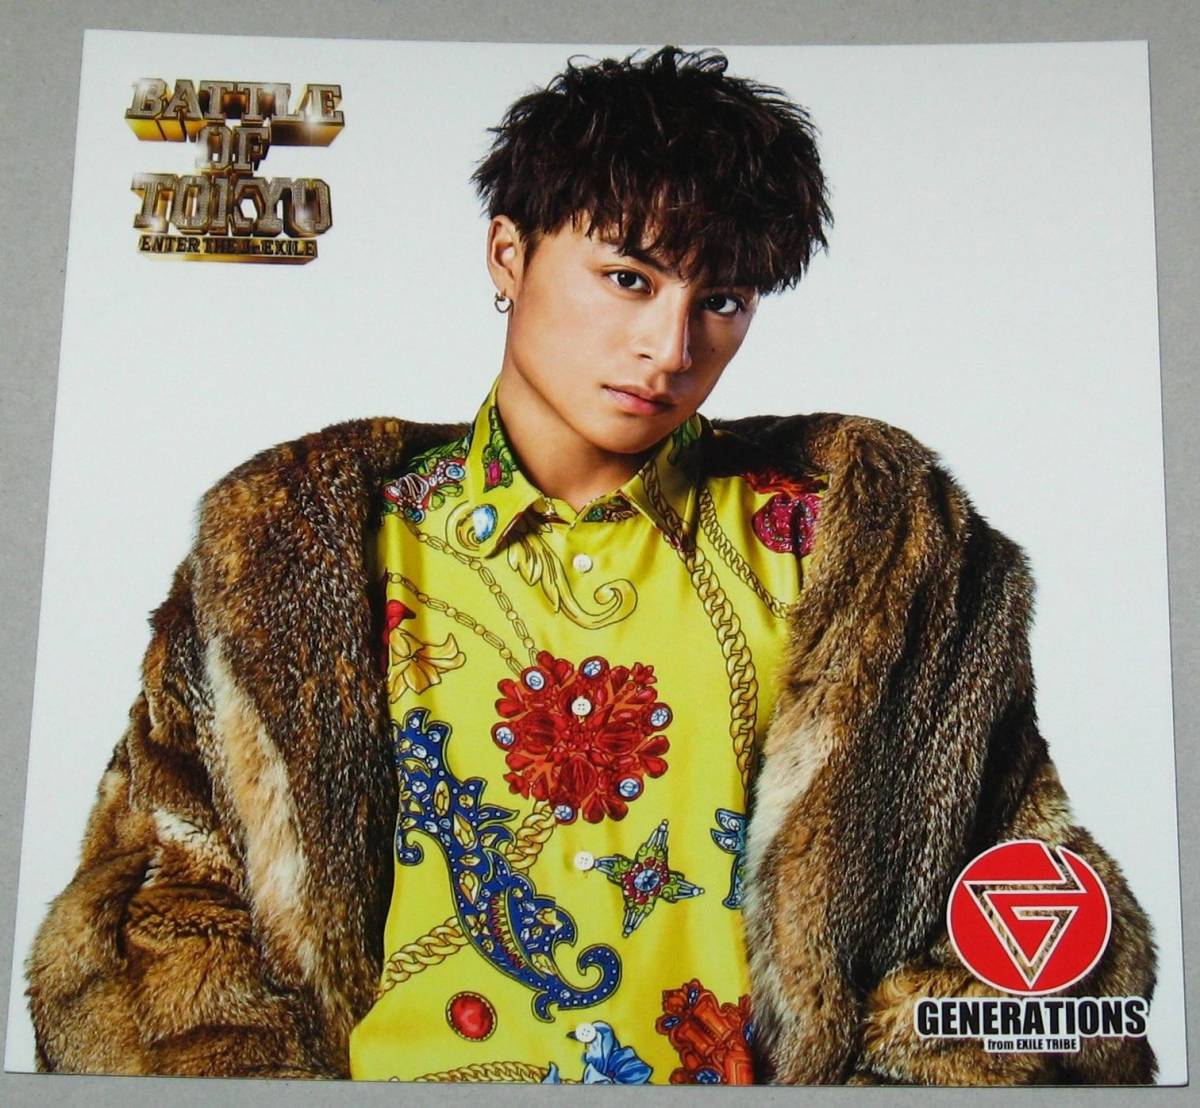 〓 GENERATIONS from EXILE TRIBE 白濱亜嵐[BATTLE OF TOKYO] 特典アザージャケット_画像1